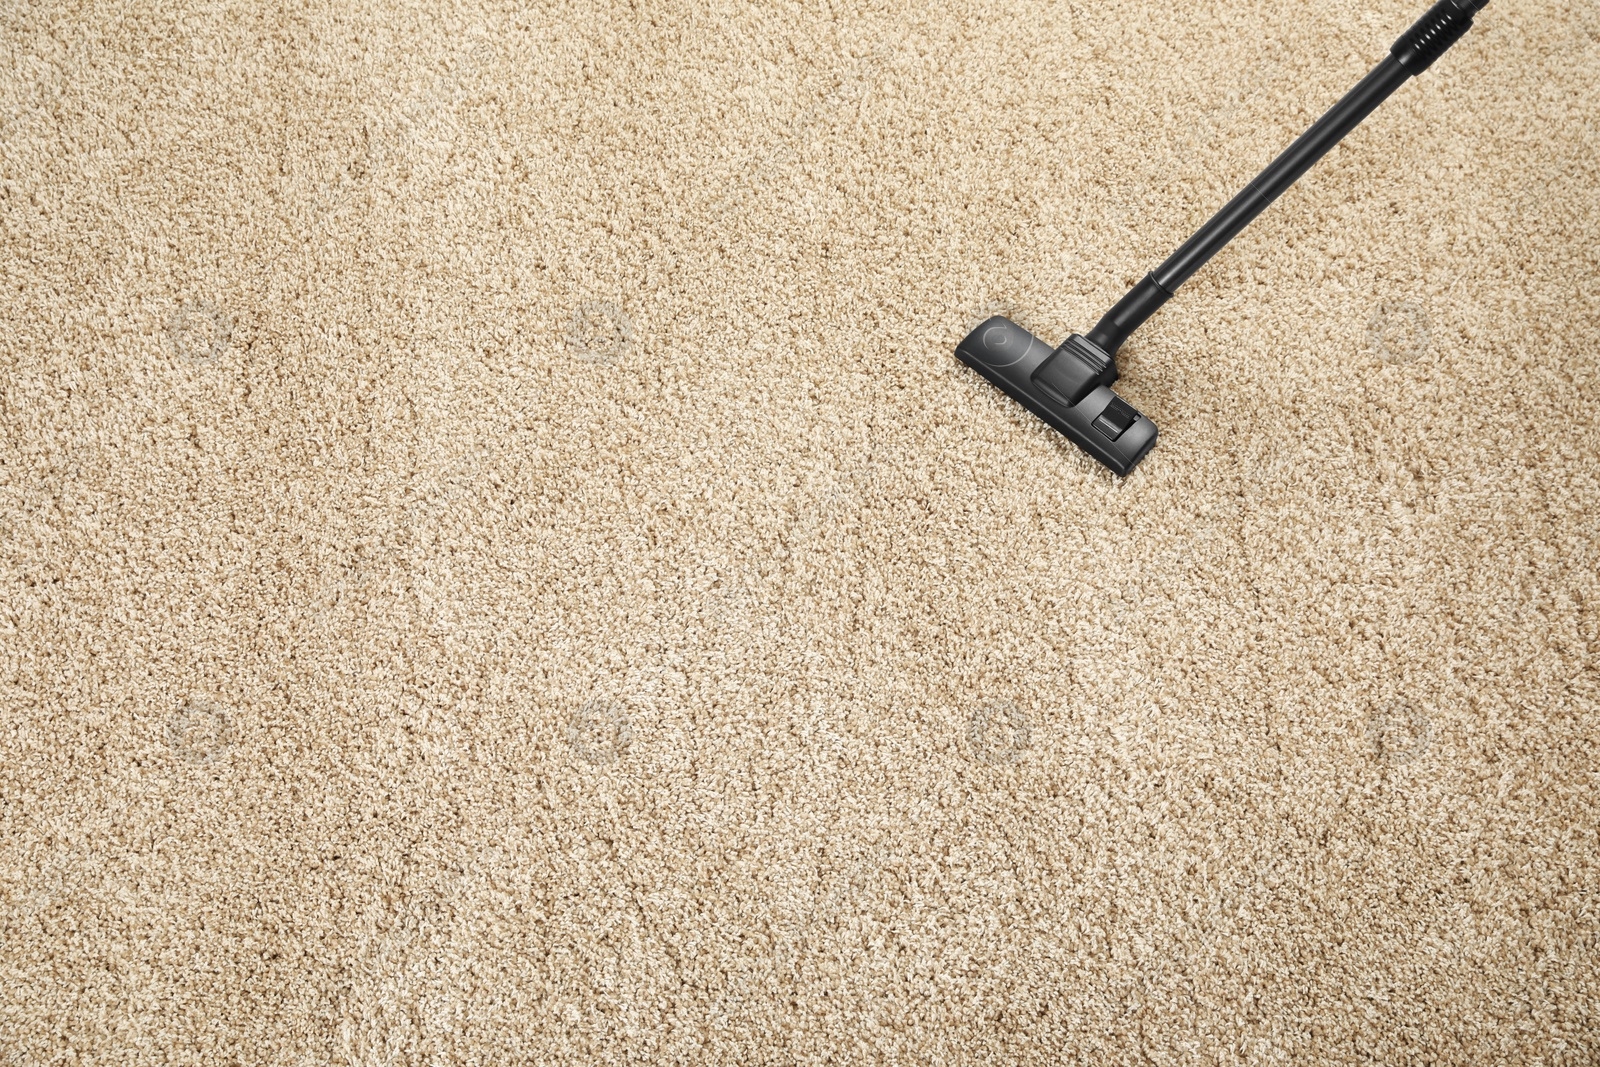 Photo of Removing dirt from beige carpet with modern vacuum cleaner, above view. Space for text